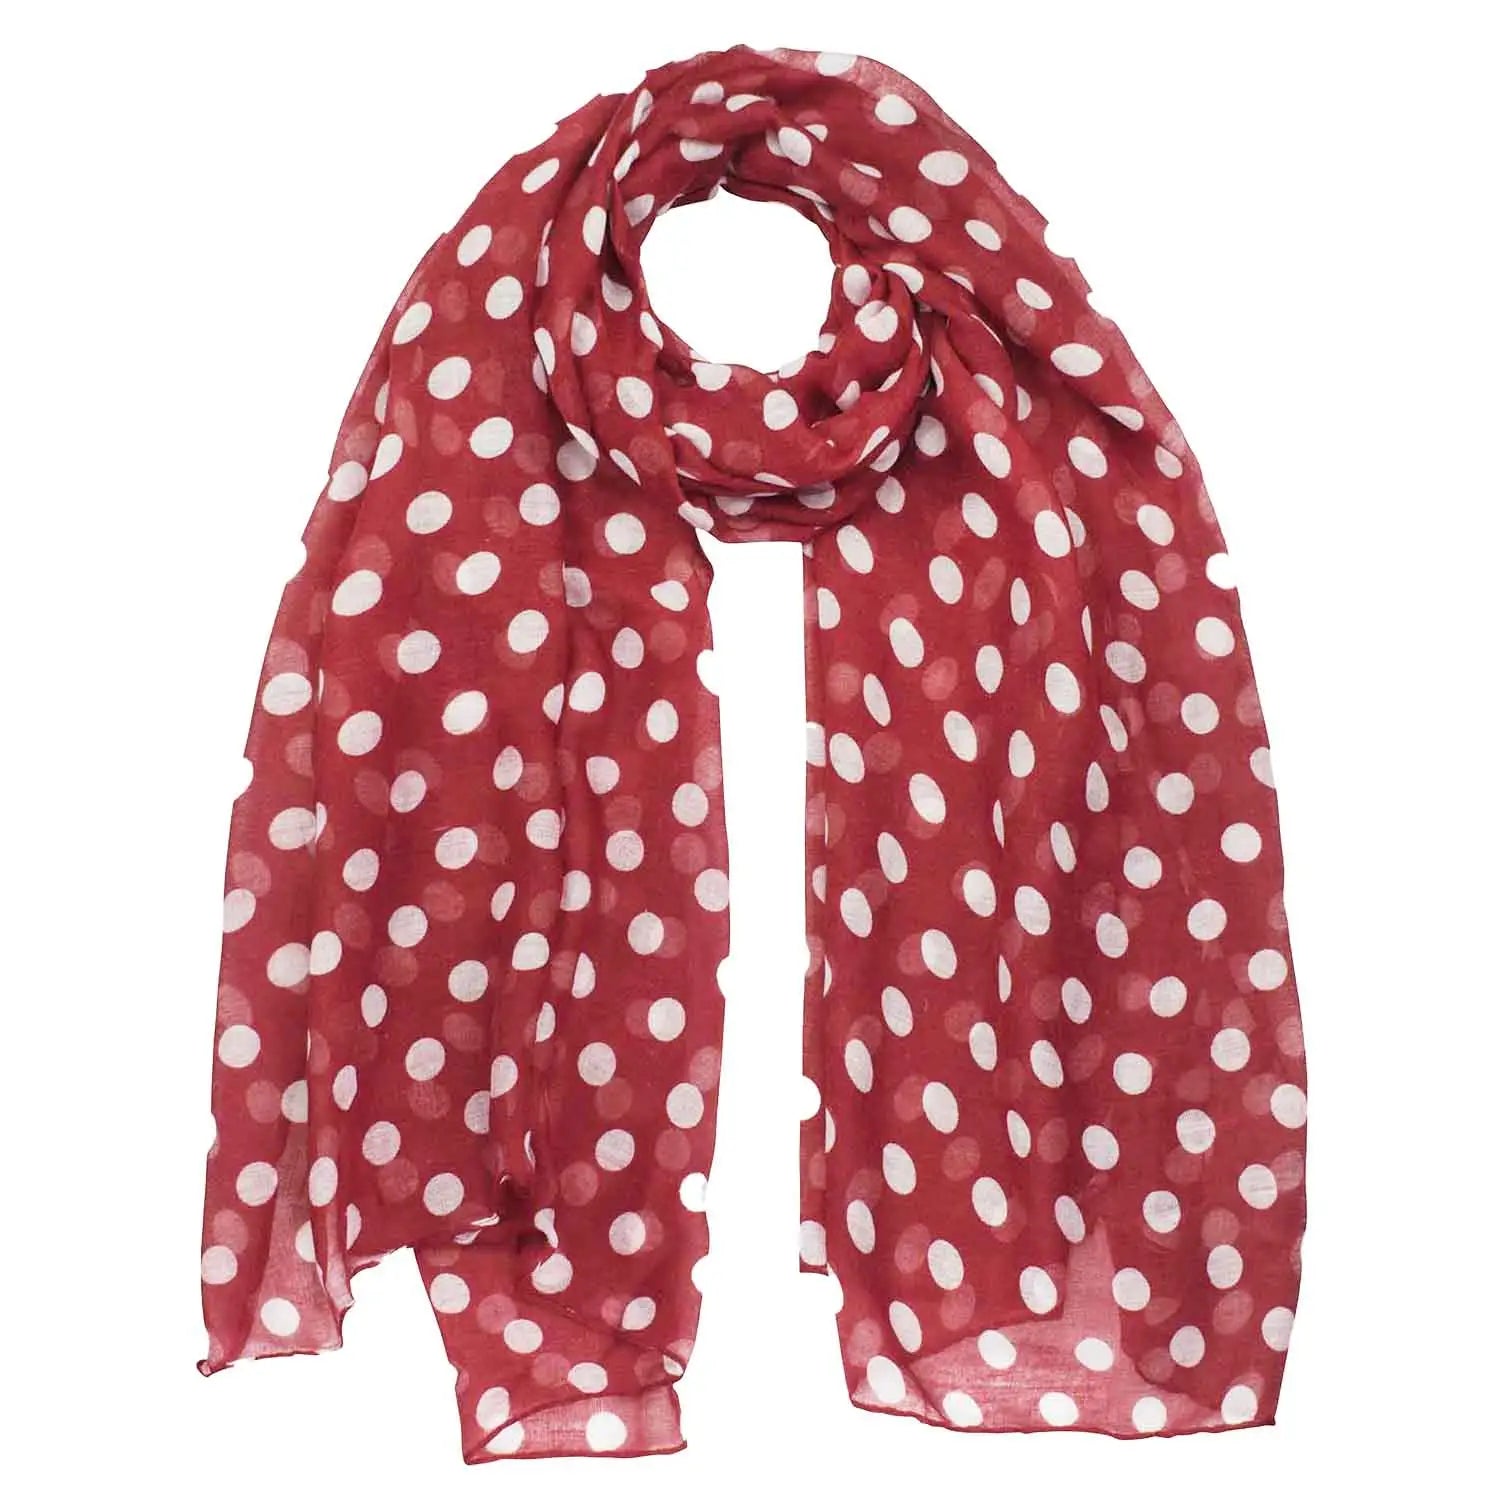 Red and White Retro Polka Dot Scarf for Women